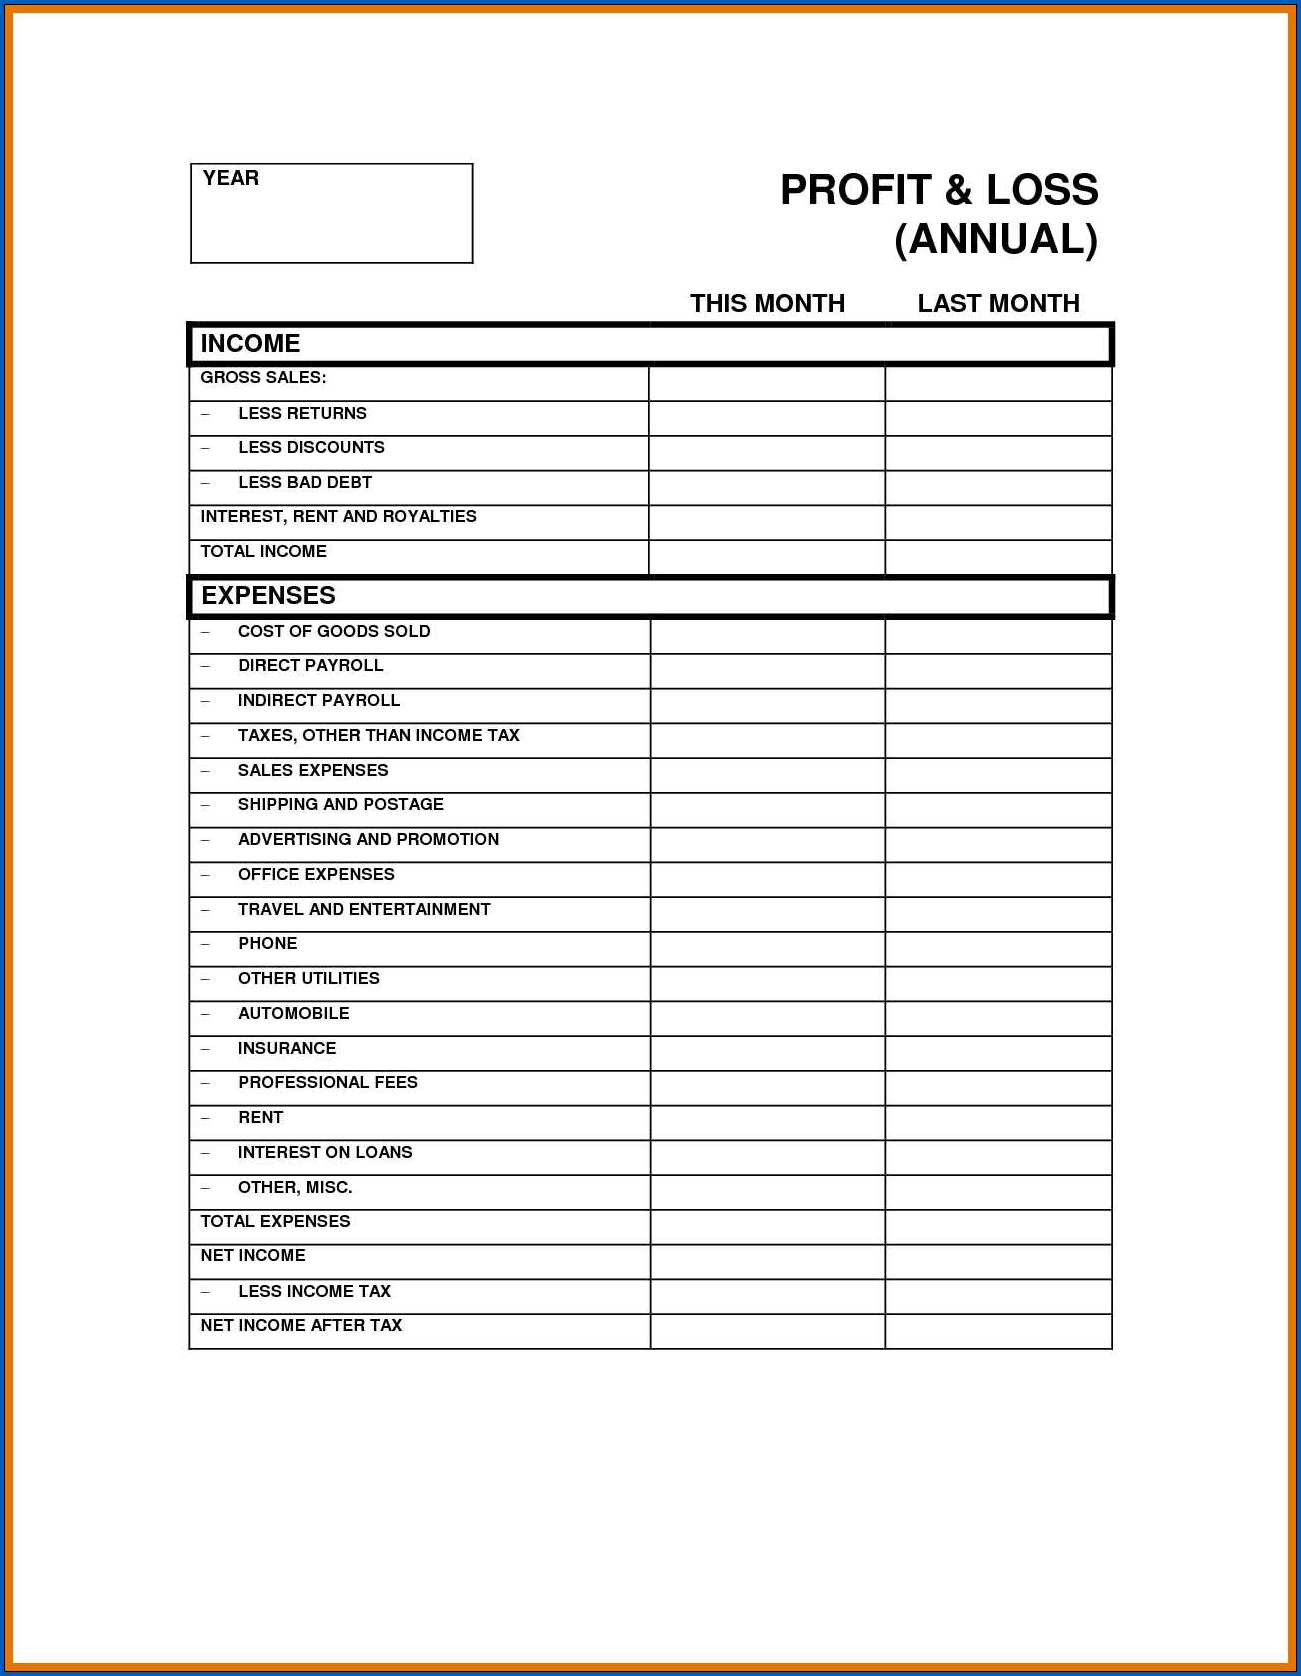 Profit And Loss Statement Template For Self Employed Excel from www.templateral.com